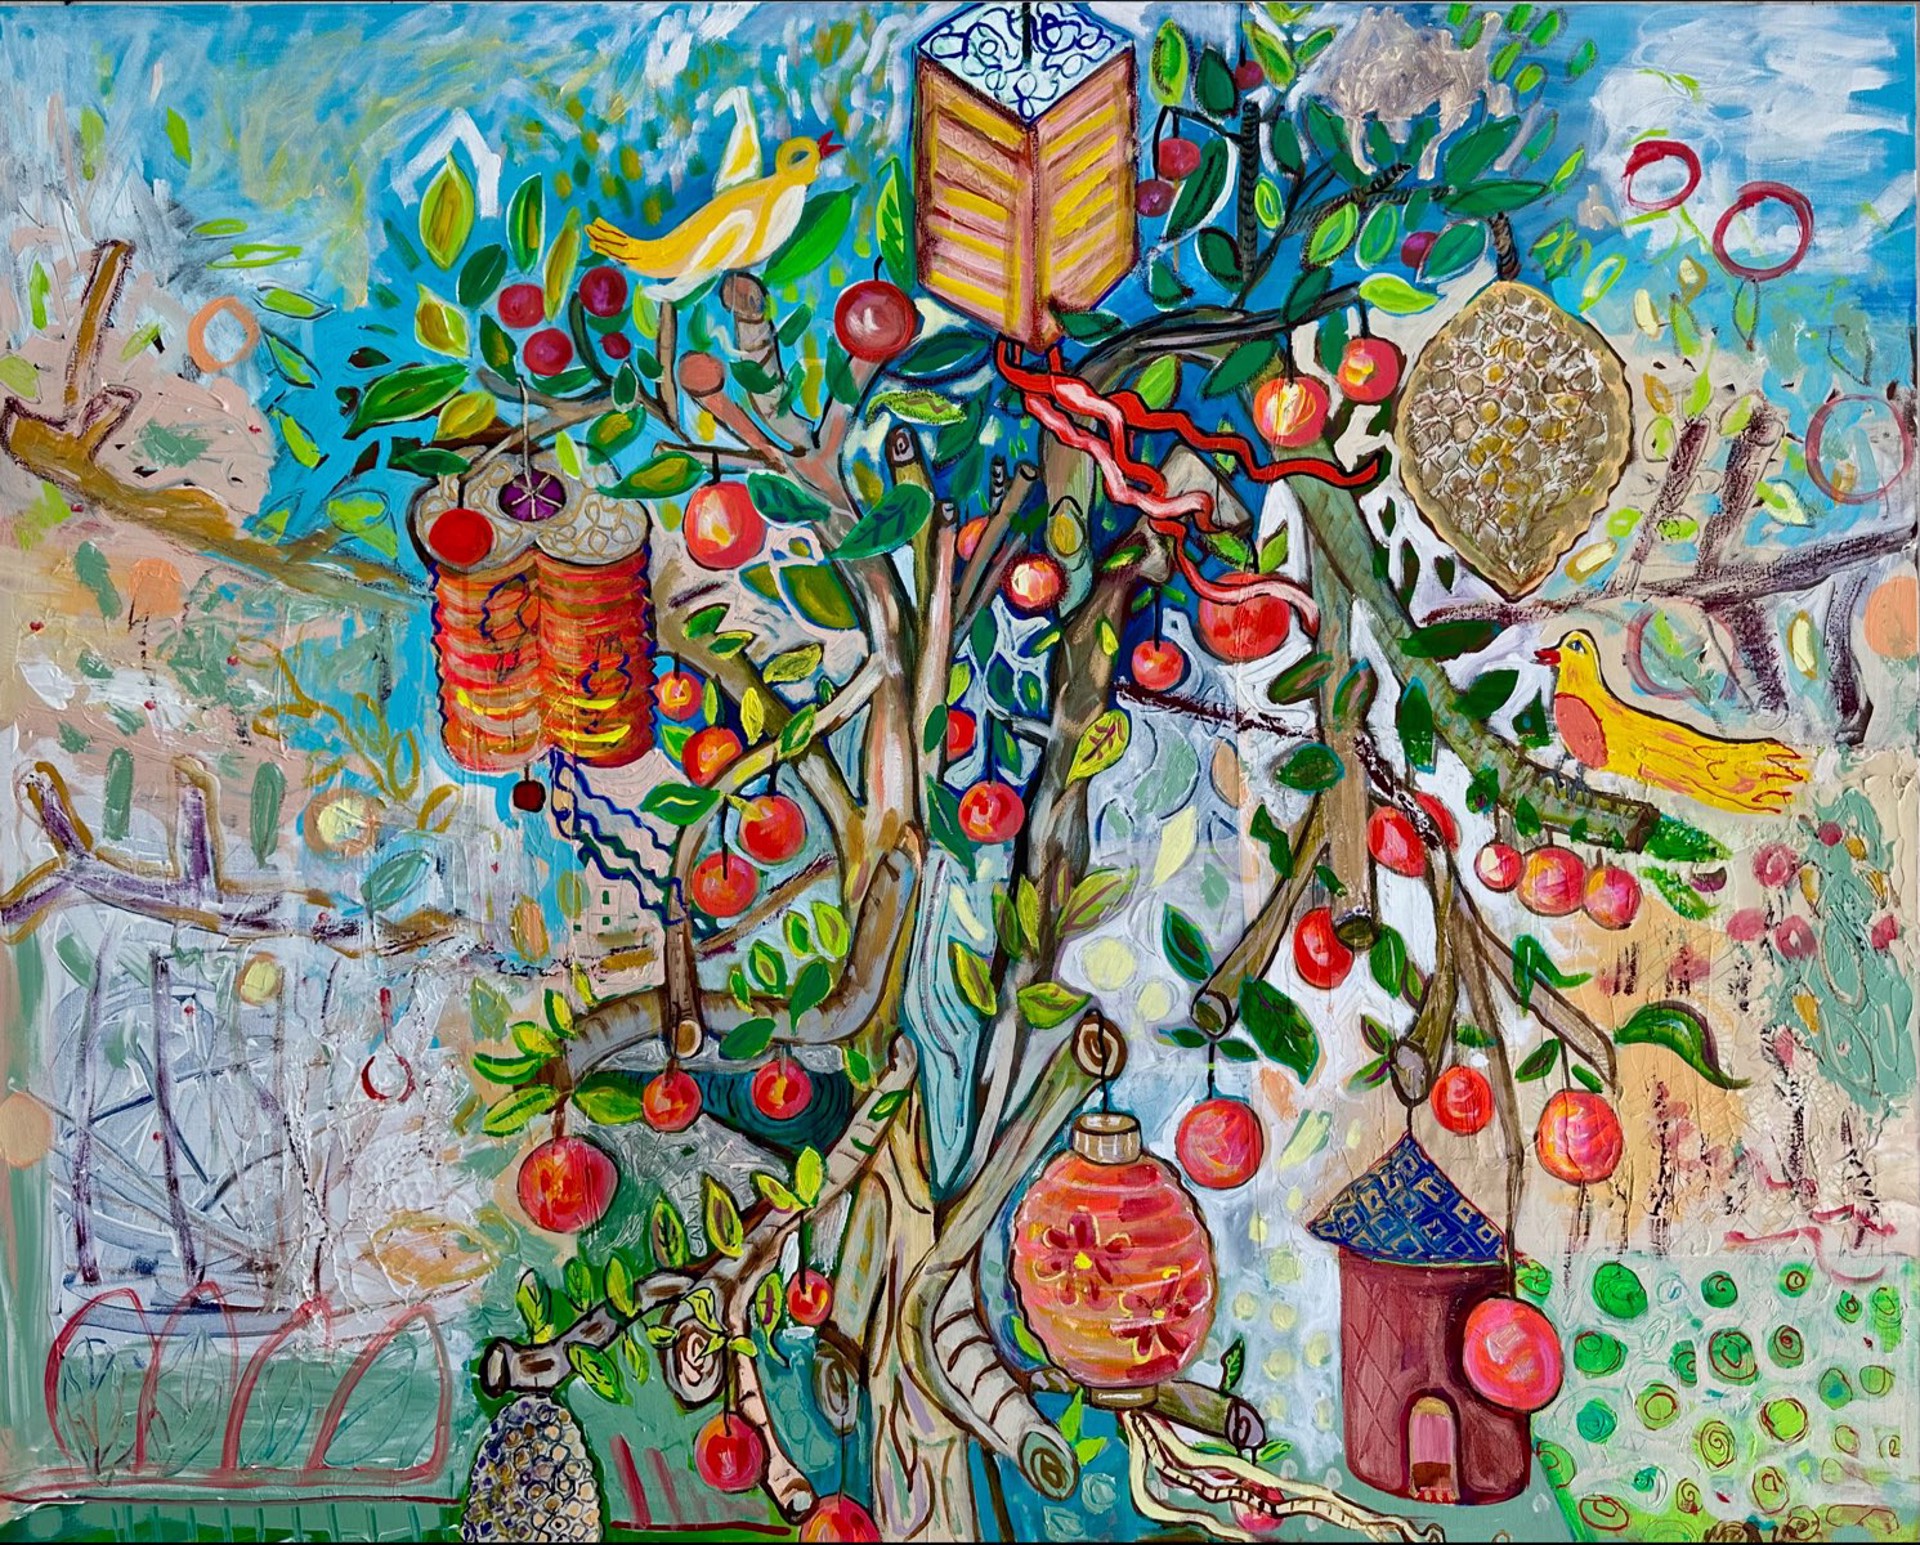 Hanging Garden by Mary Elizabeth Kimbrough